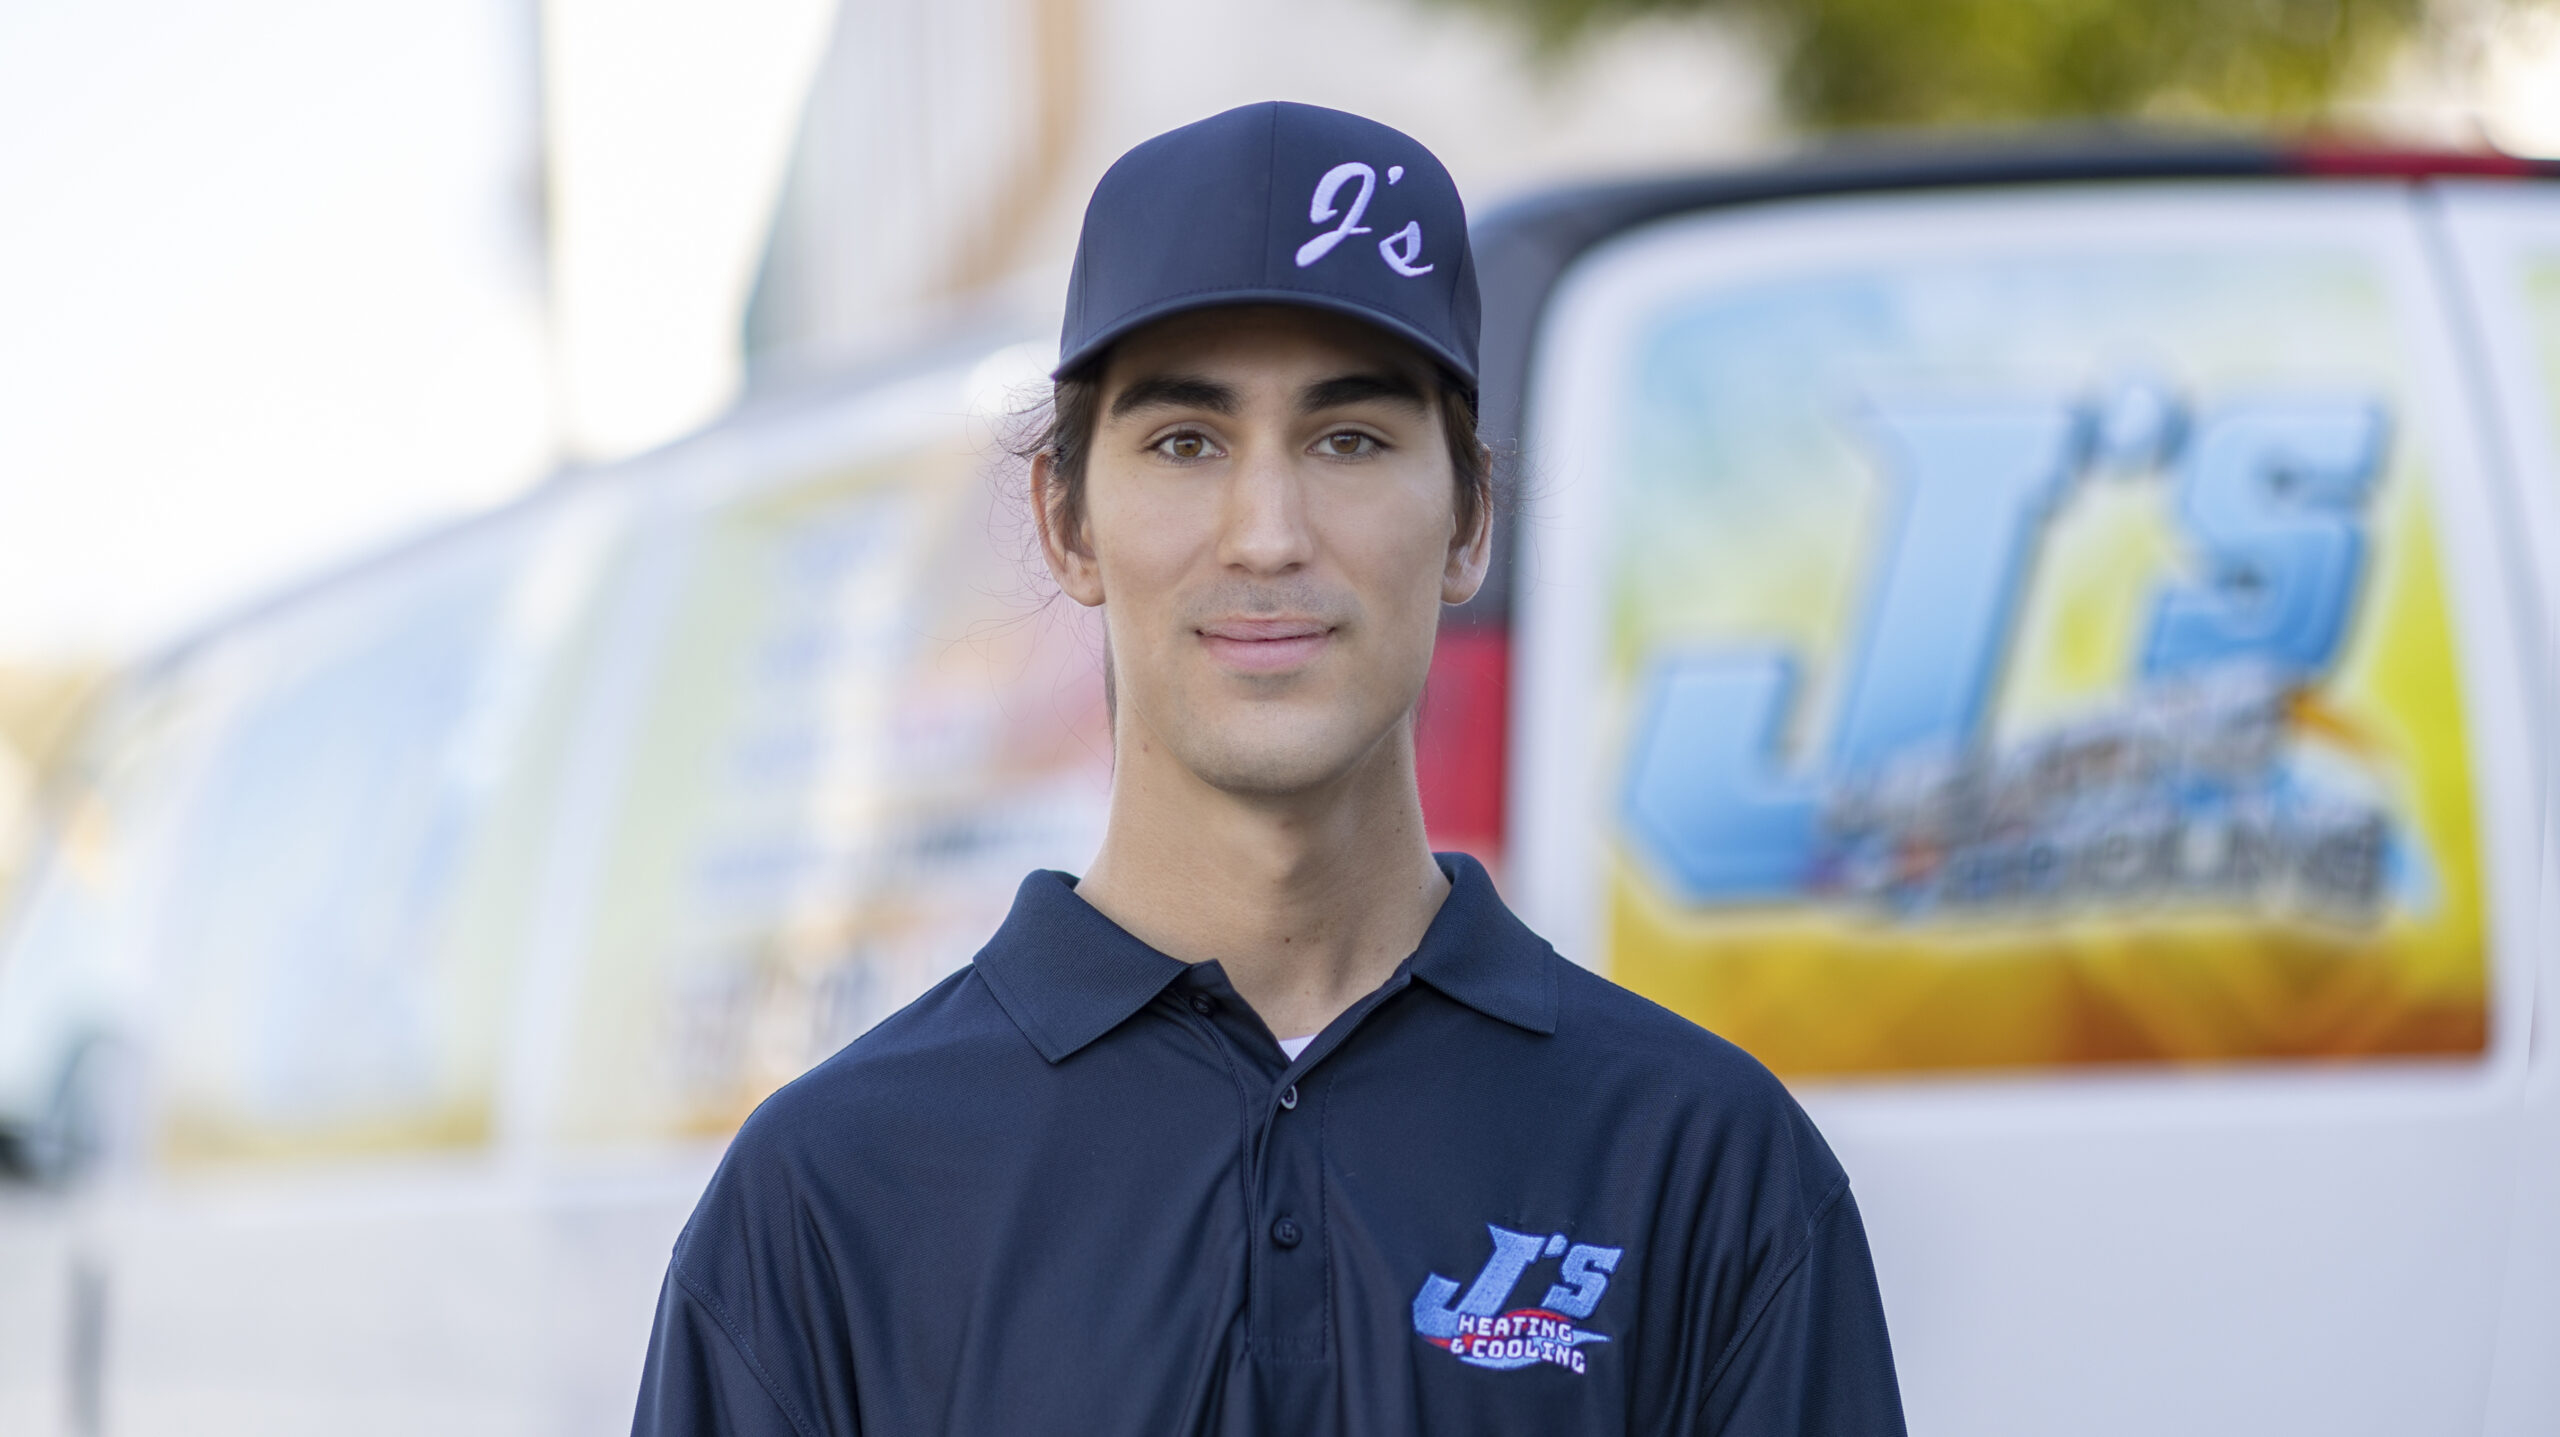 J's Heating and Cooling Gabriel Hawkins Van profile picture.